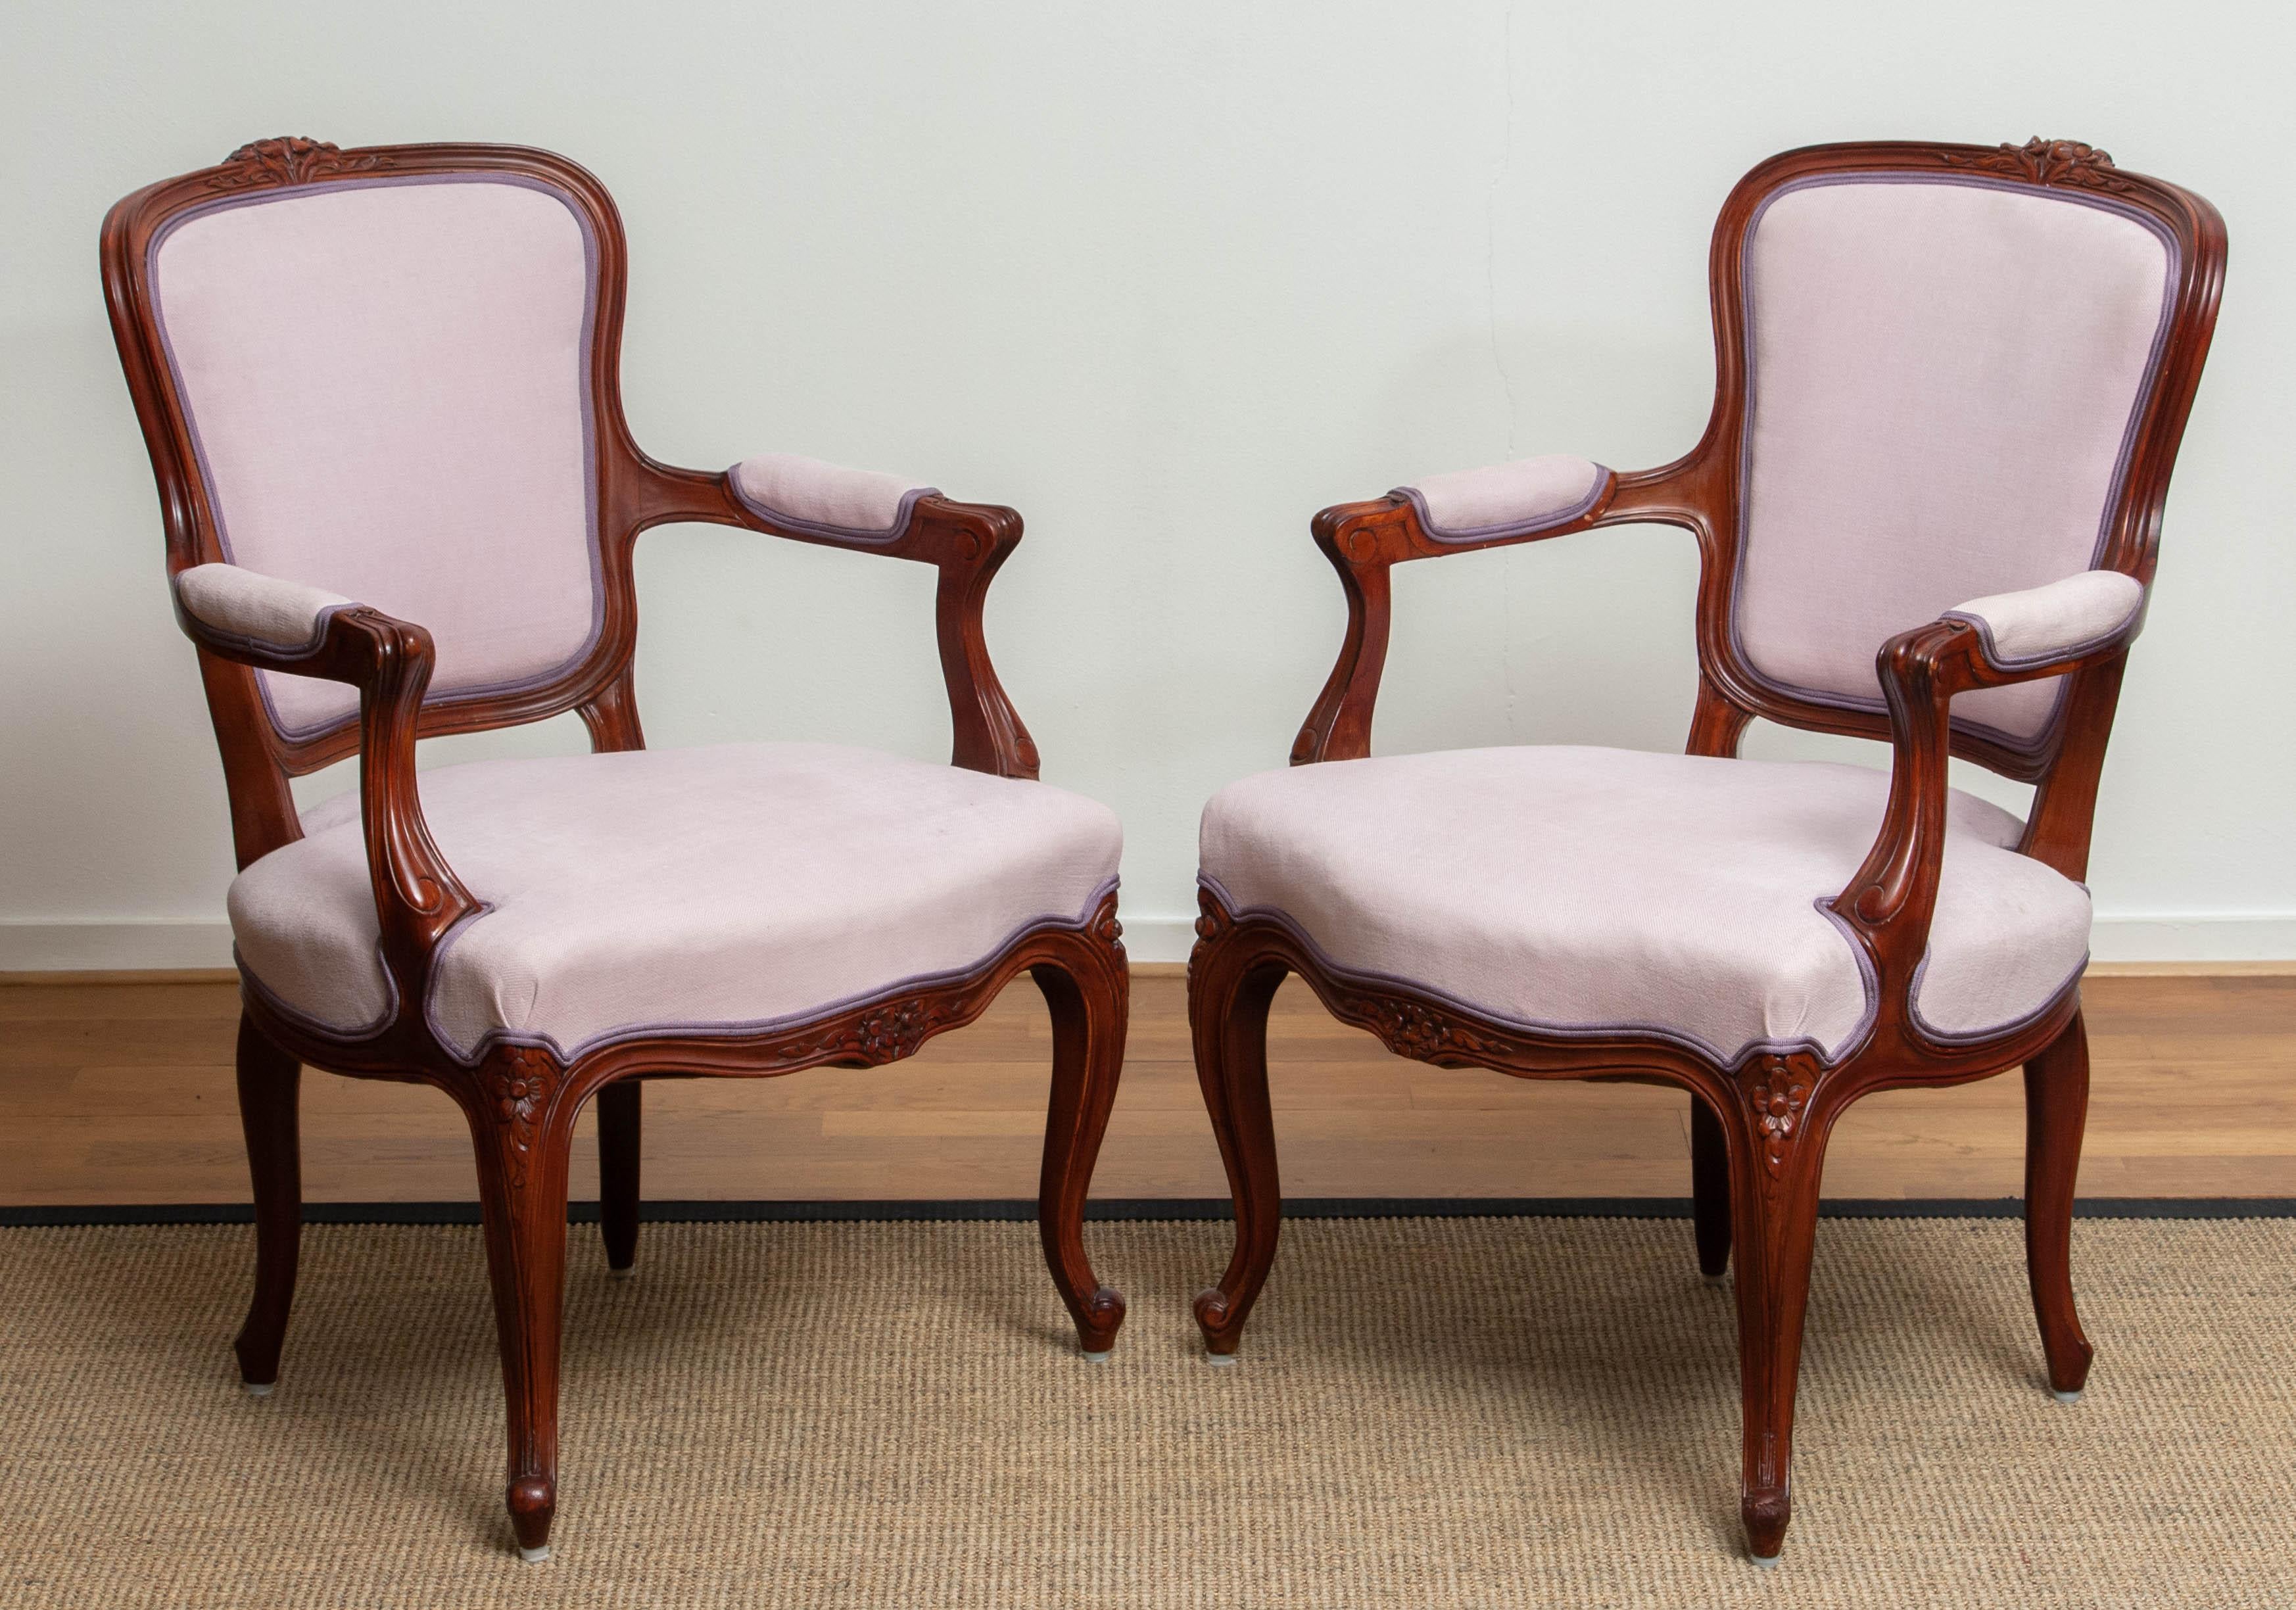 1950s, the Swedish Neo-Rococo, and finished in the shabby chic technique armchair is in perfect condition. Upholstered in pink fabric and two extra cushions for extra comfort also in pink jacquard. Seat height with the extra cushion is: 21.20 inches